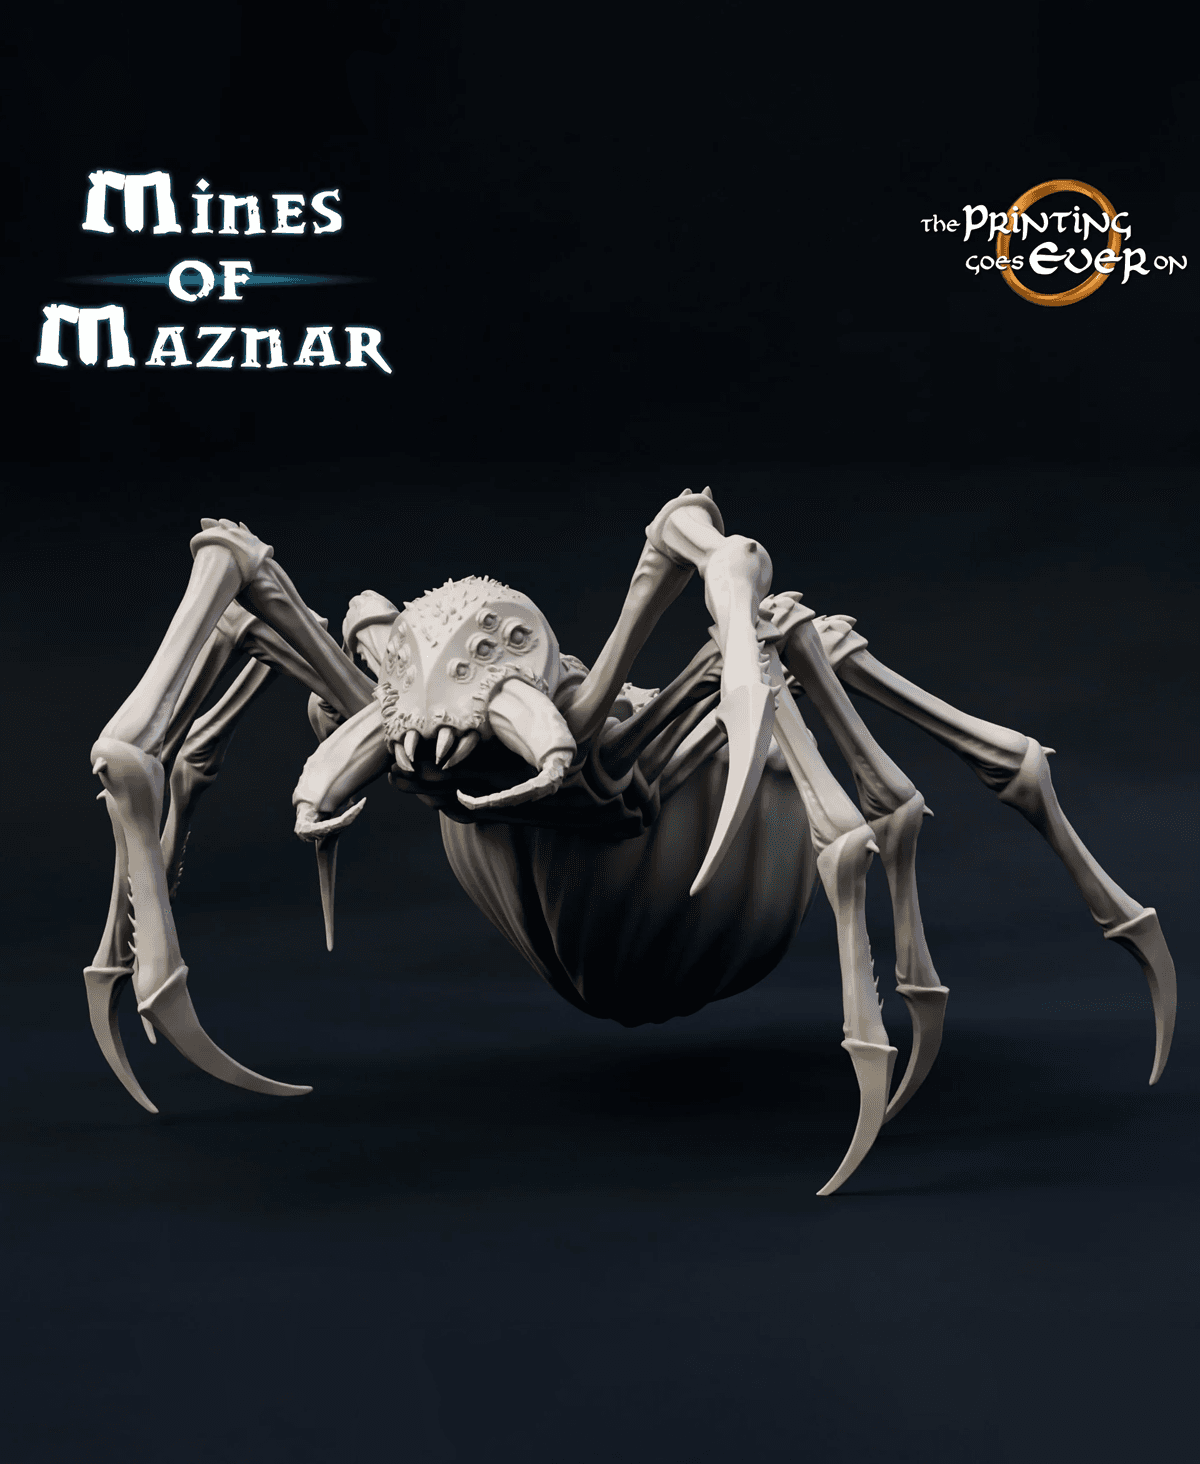 Giant Spider - A 3d model